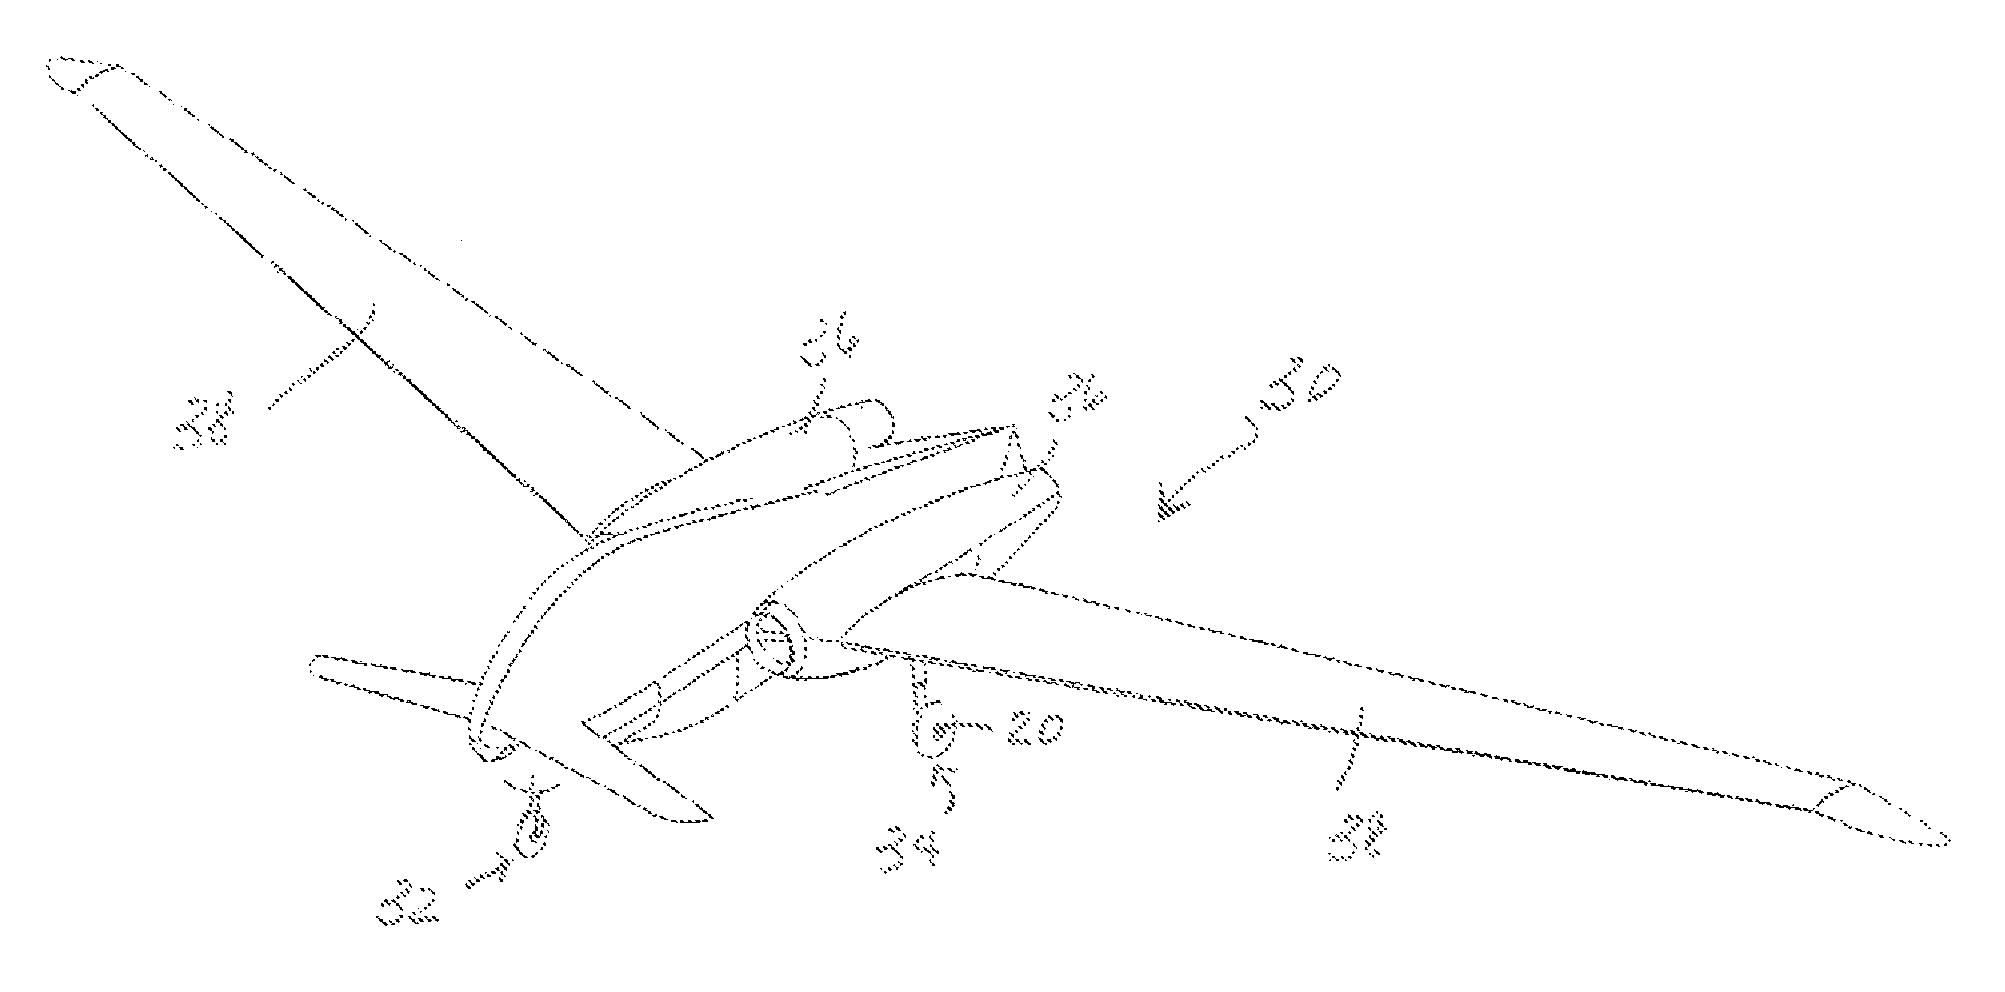 Method for improving ground travel capability and enhancing stealth in unmanned aerial vehicles